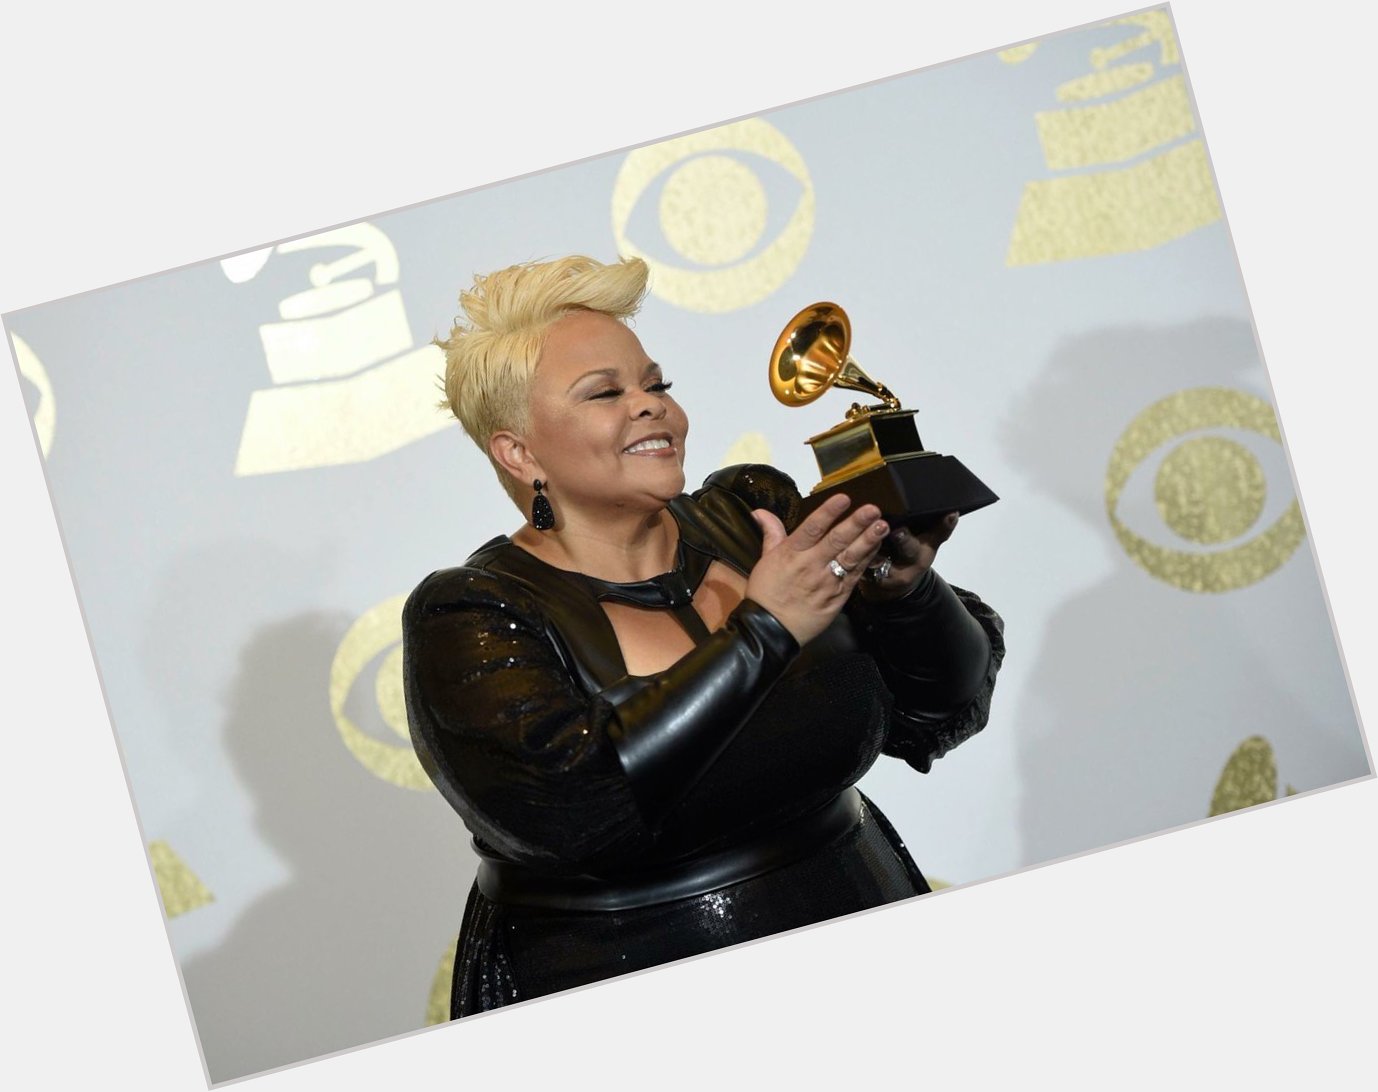 Happy birthday to actress and gospel singer Tamela Mann! She turns 51 today. 